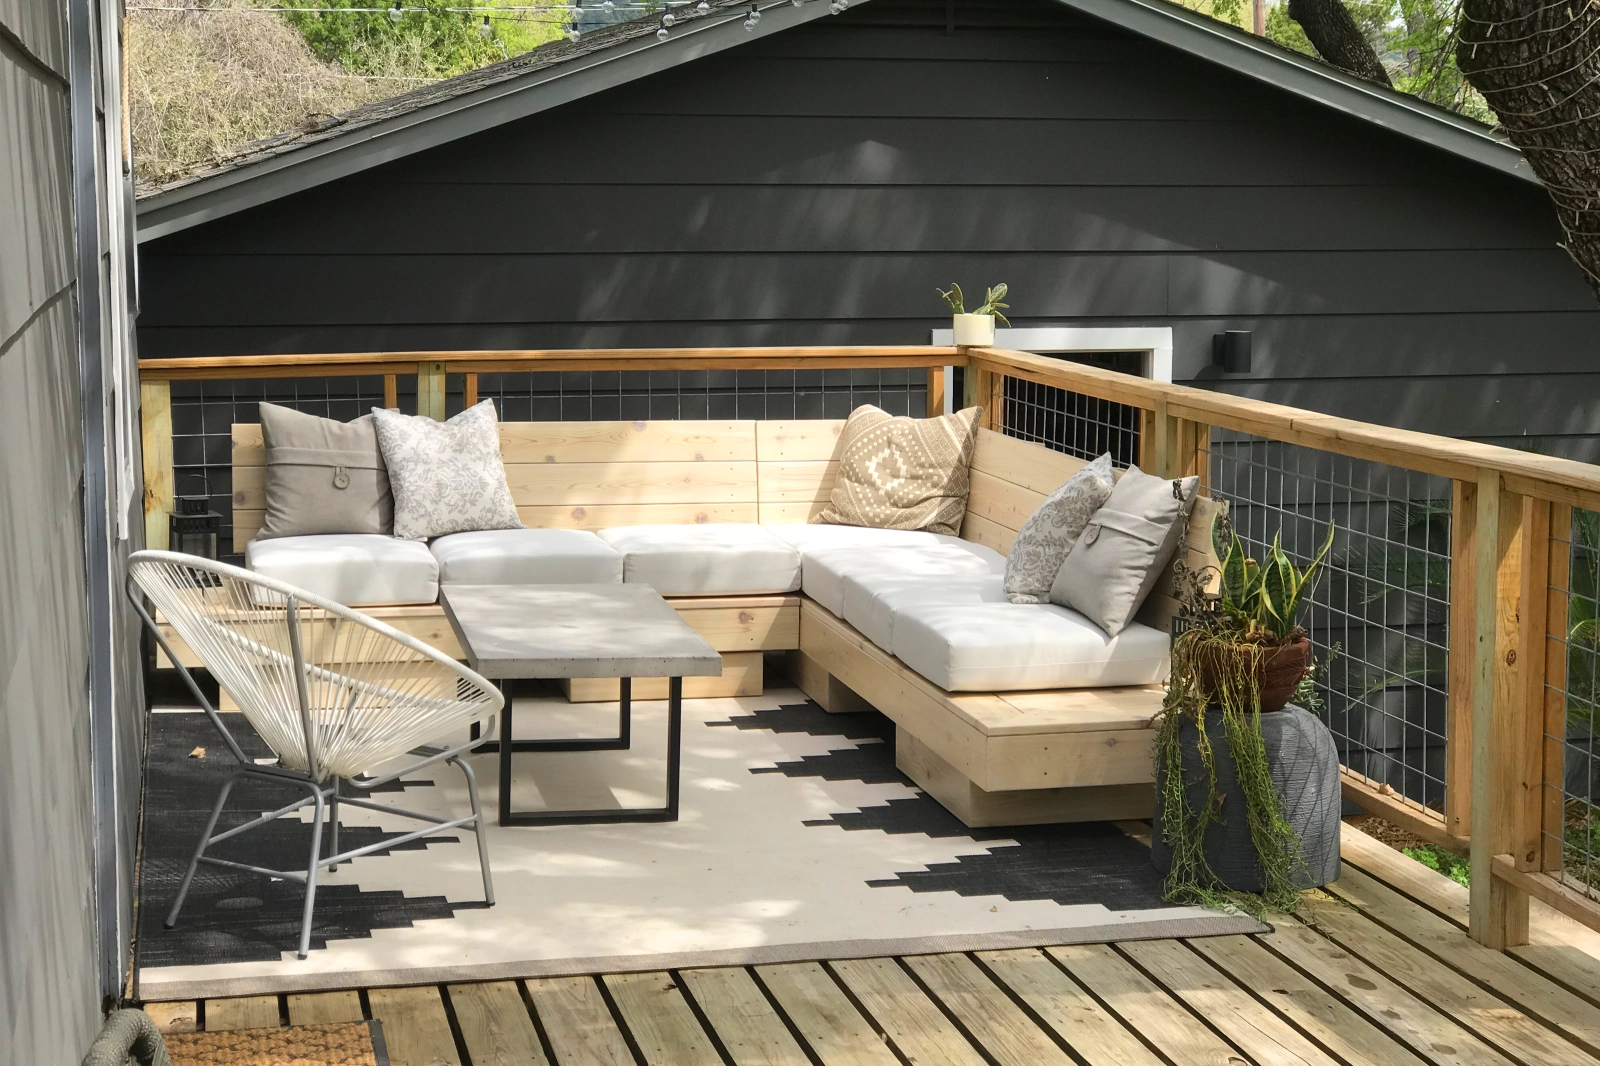 Why You Should Check the Density of Your Decking